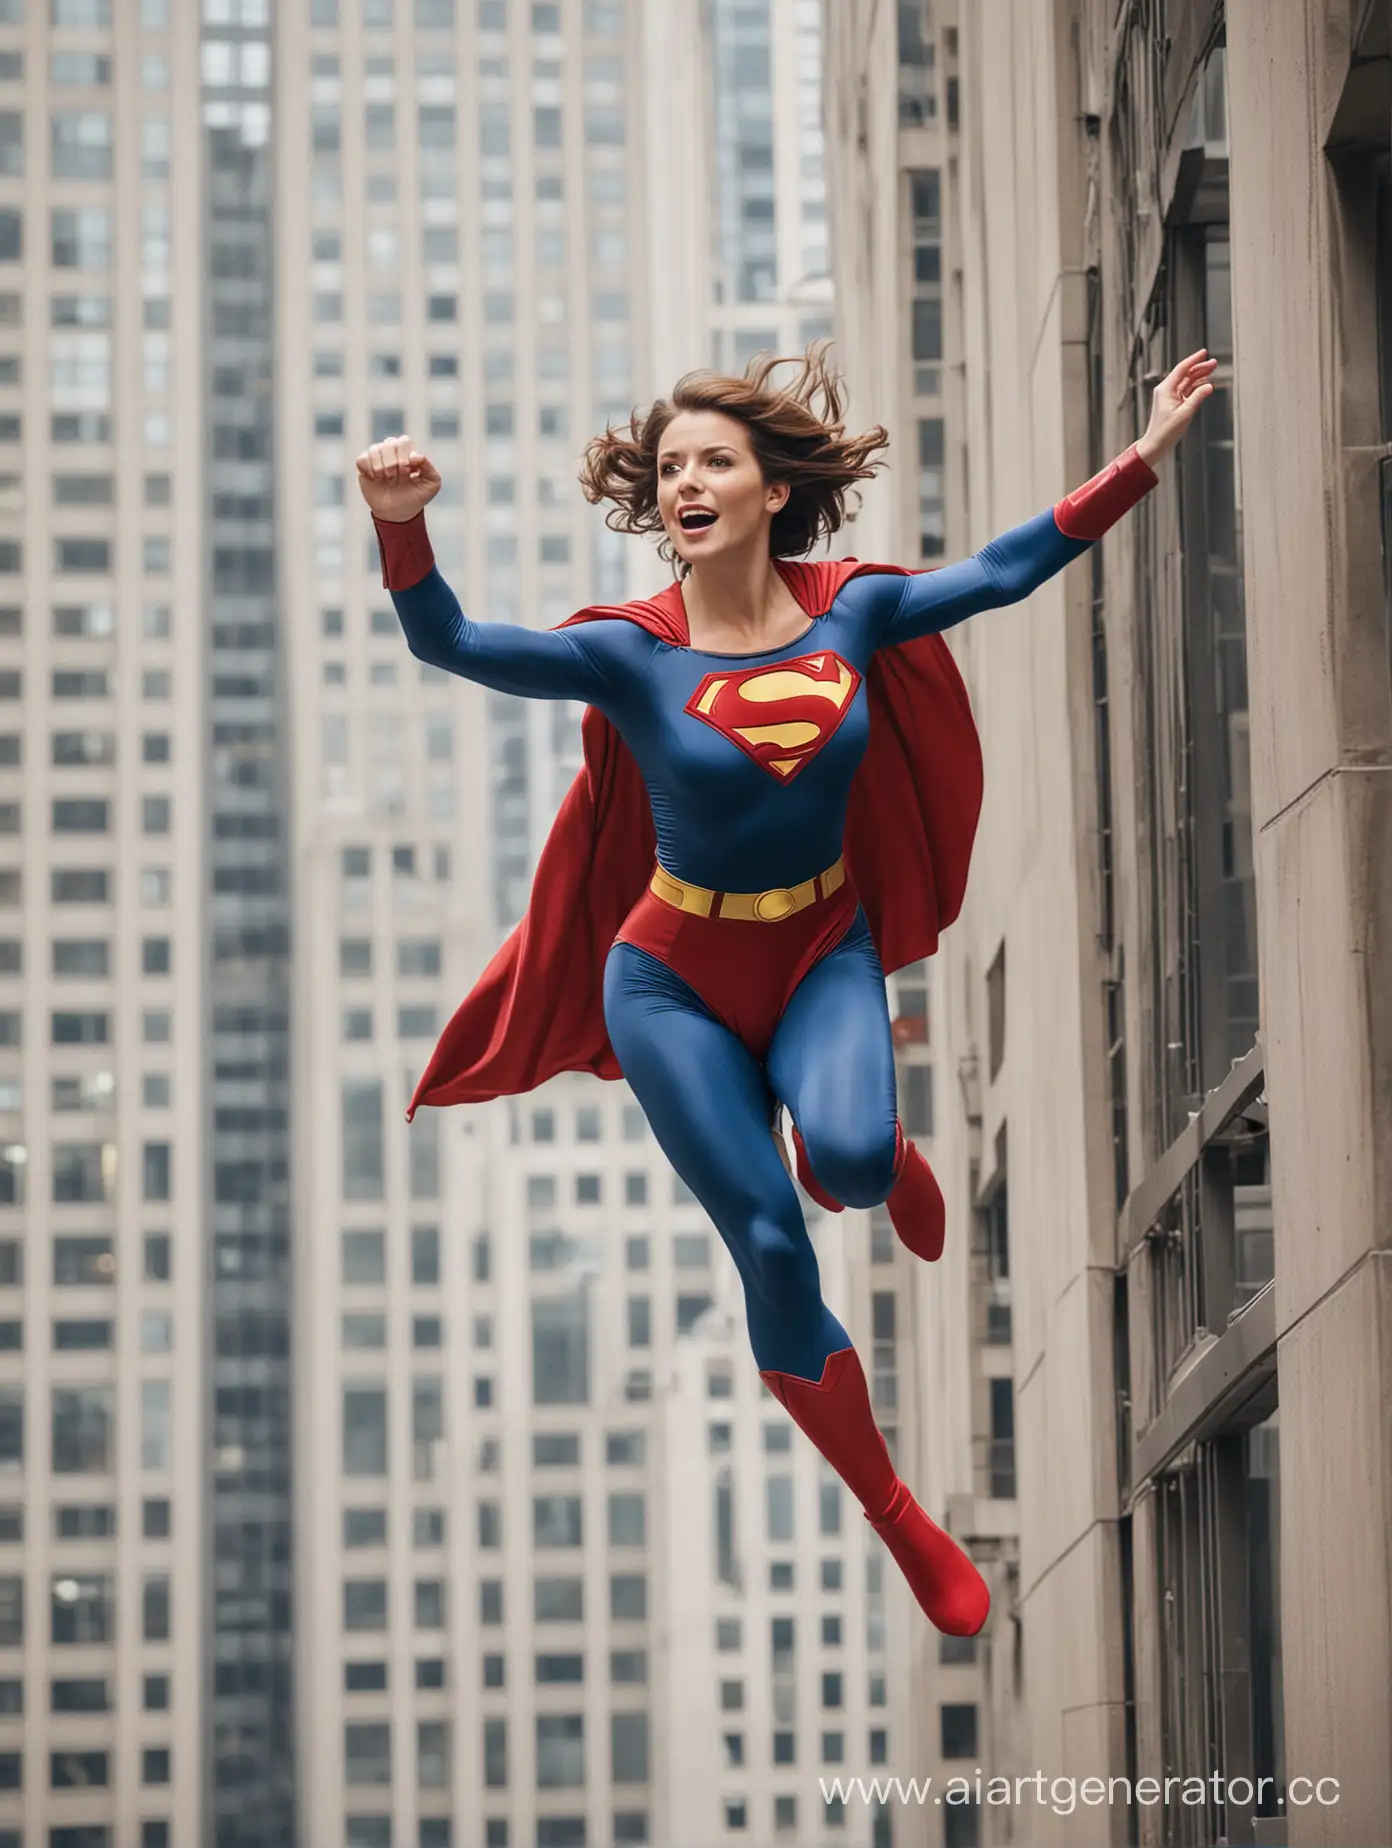 40YearOld-Woman-Leaping-as-Superman-from-Skyscraper